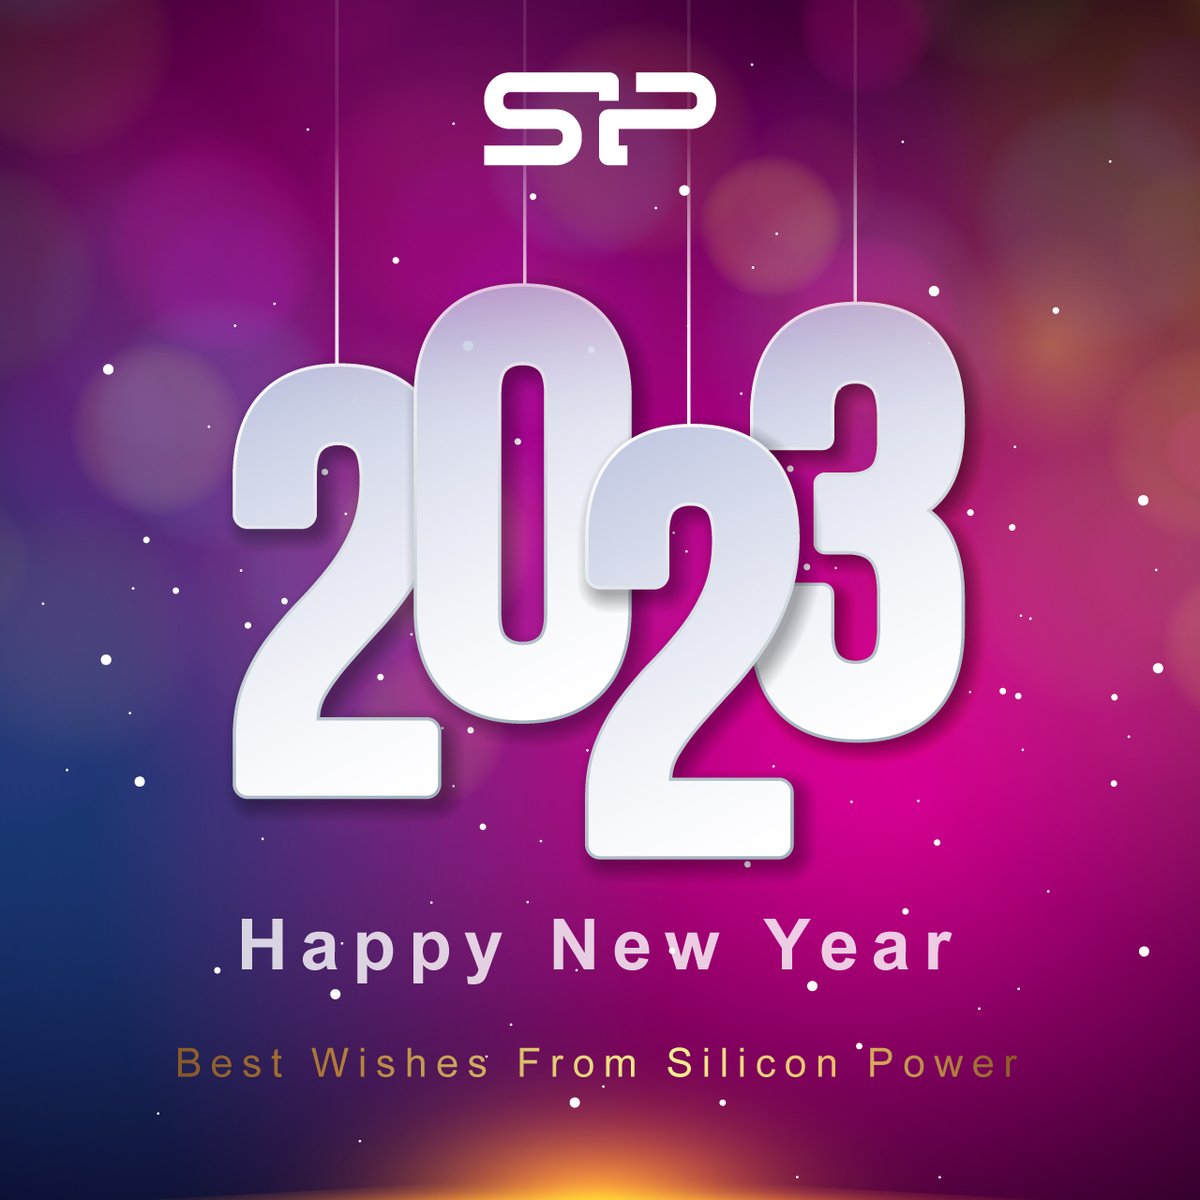 Happy New Year🎆🎇 SP wishes you all the best😚 #SP #siliconpower #newyear #2023